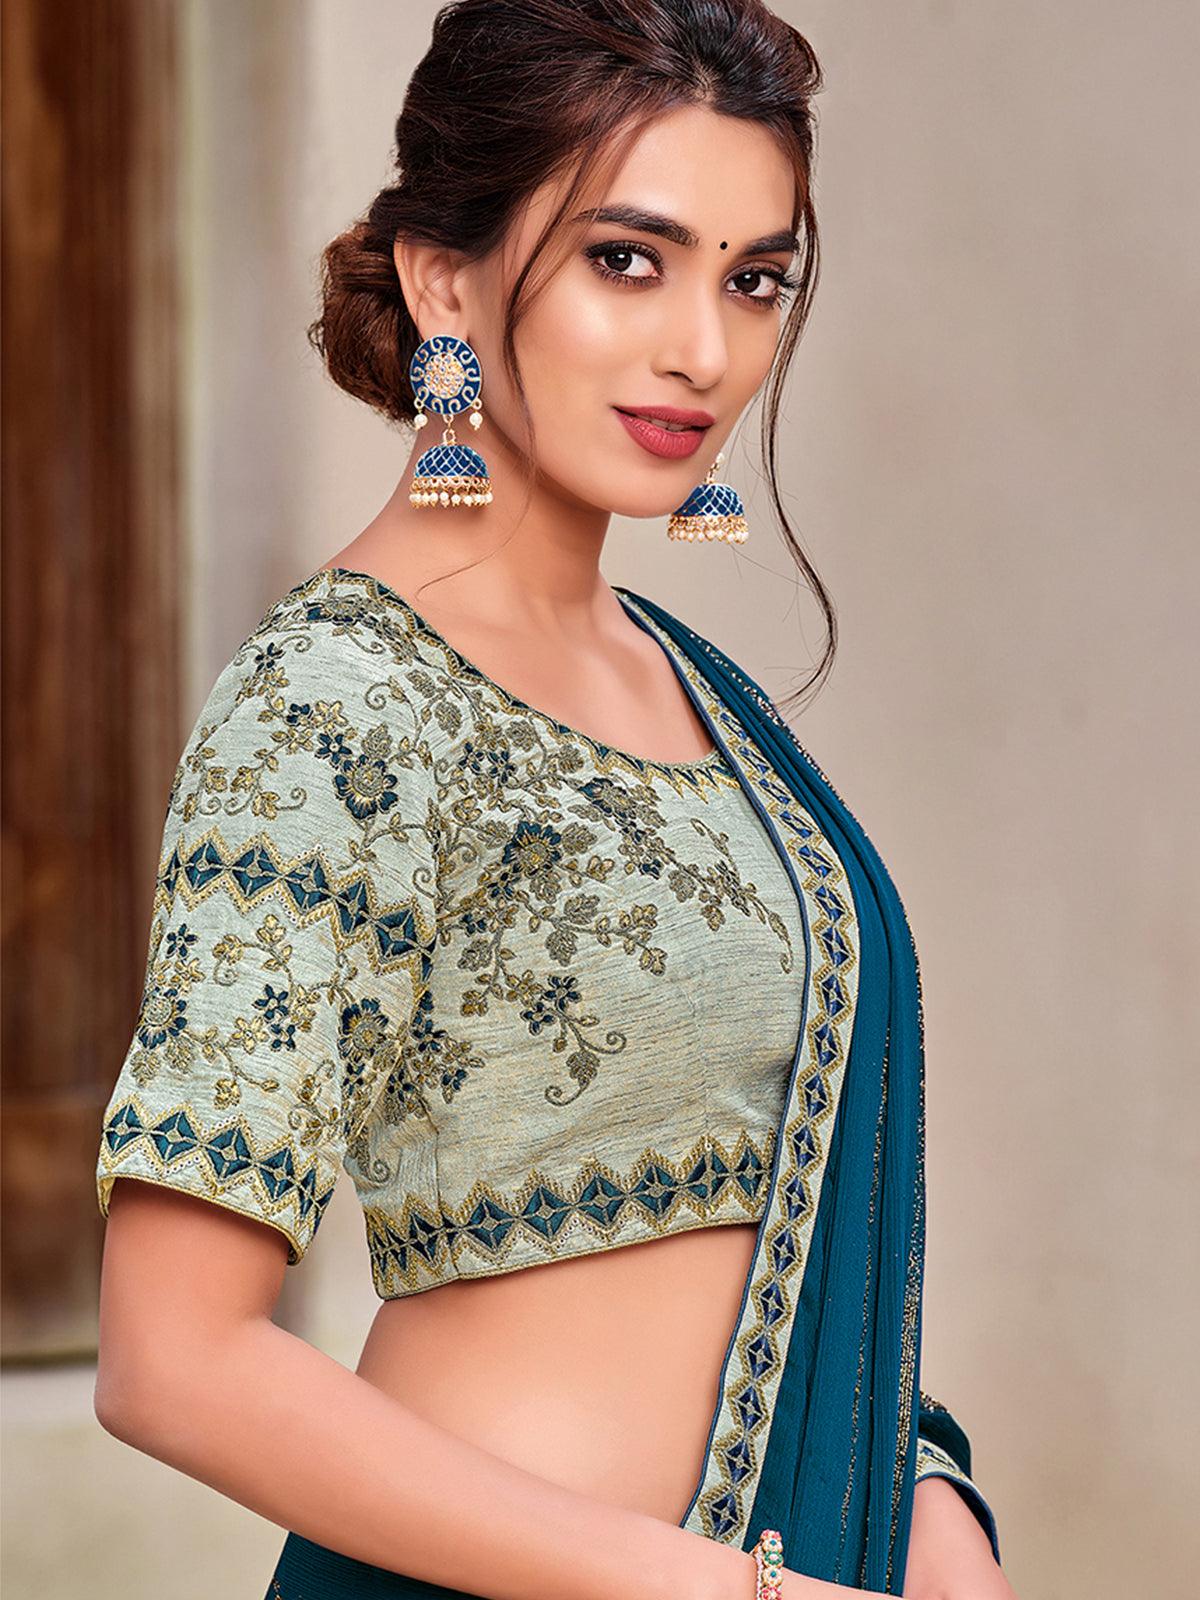 Women's Teal Chiffon Designer Saree With Blouse - Odette